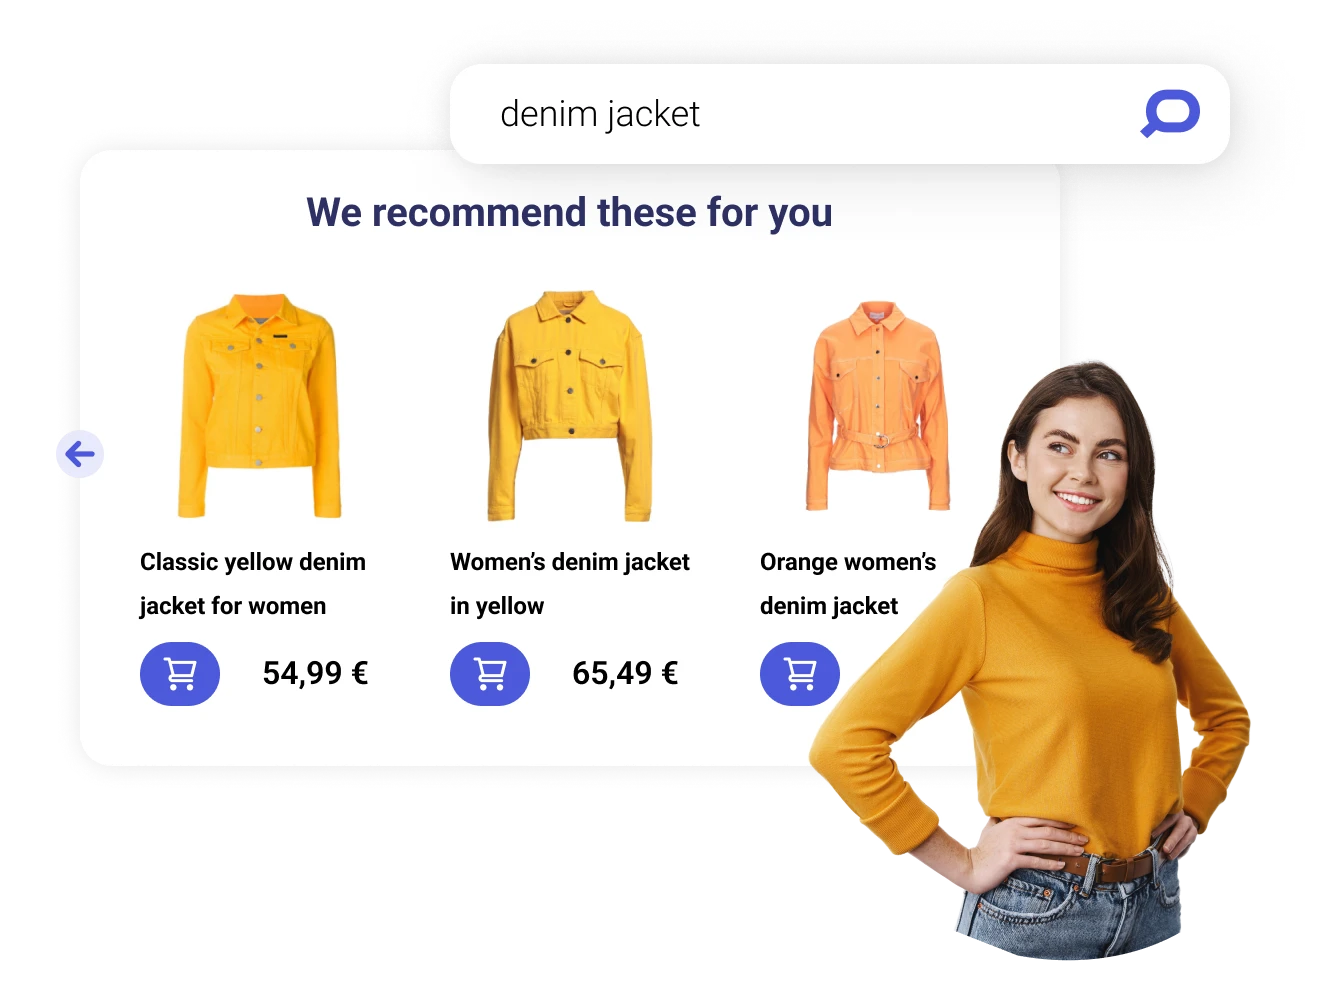 Showcasing personalized recommendation feature by showing offerings tailored shoppers' preferences